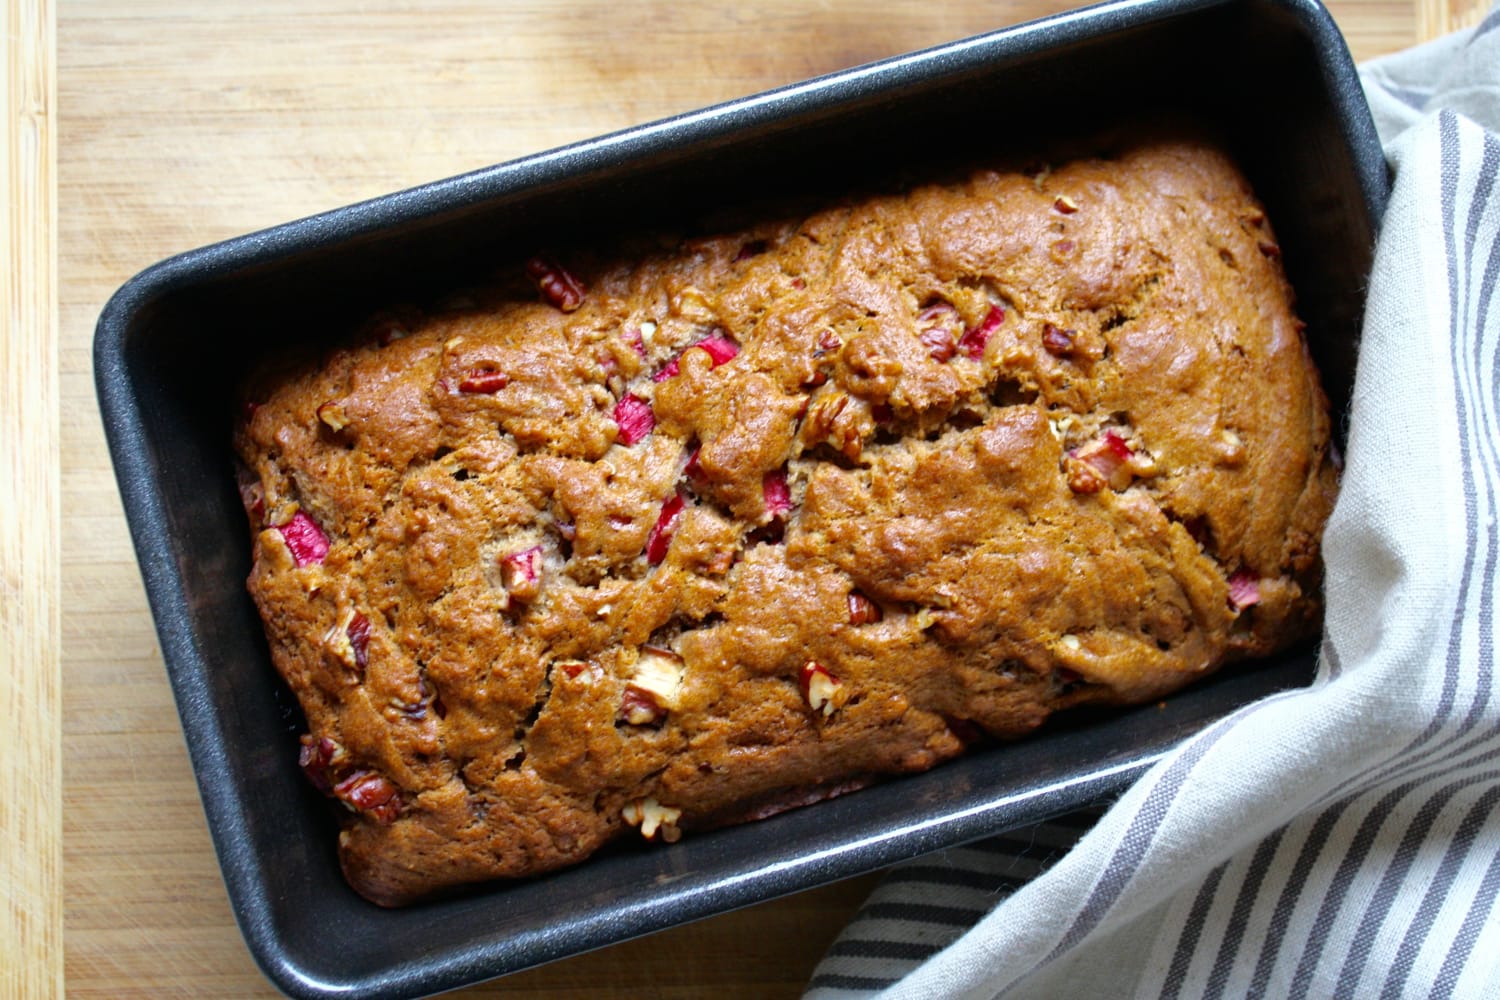 This lovely rhubarb cinnamon bread is spring in a loaf!